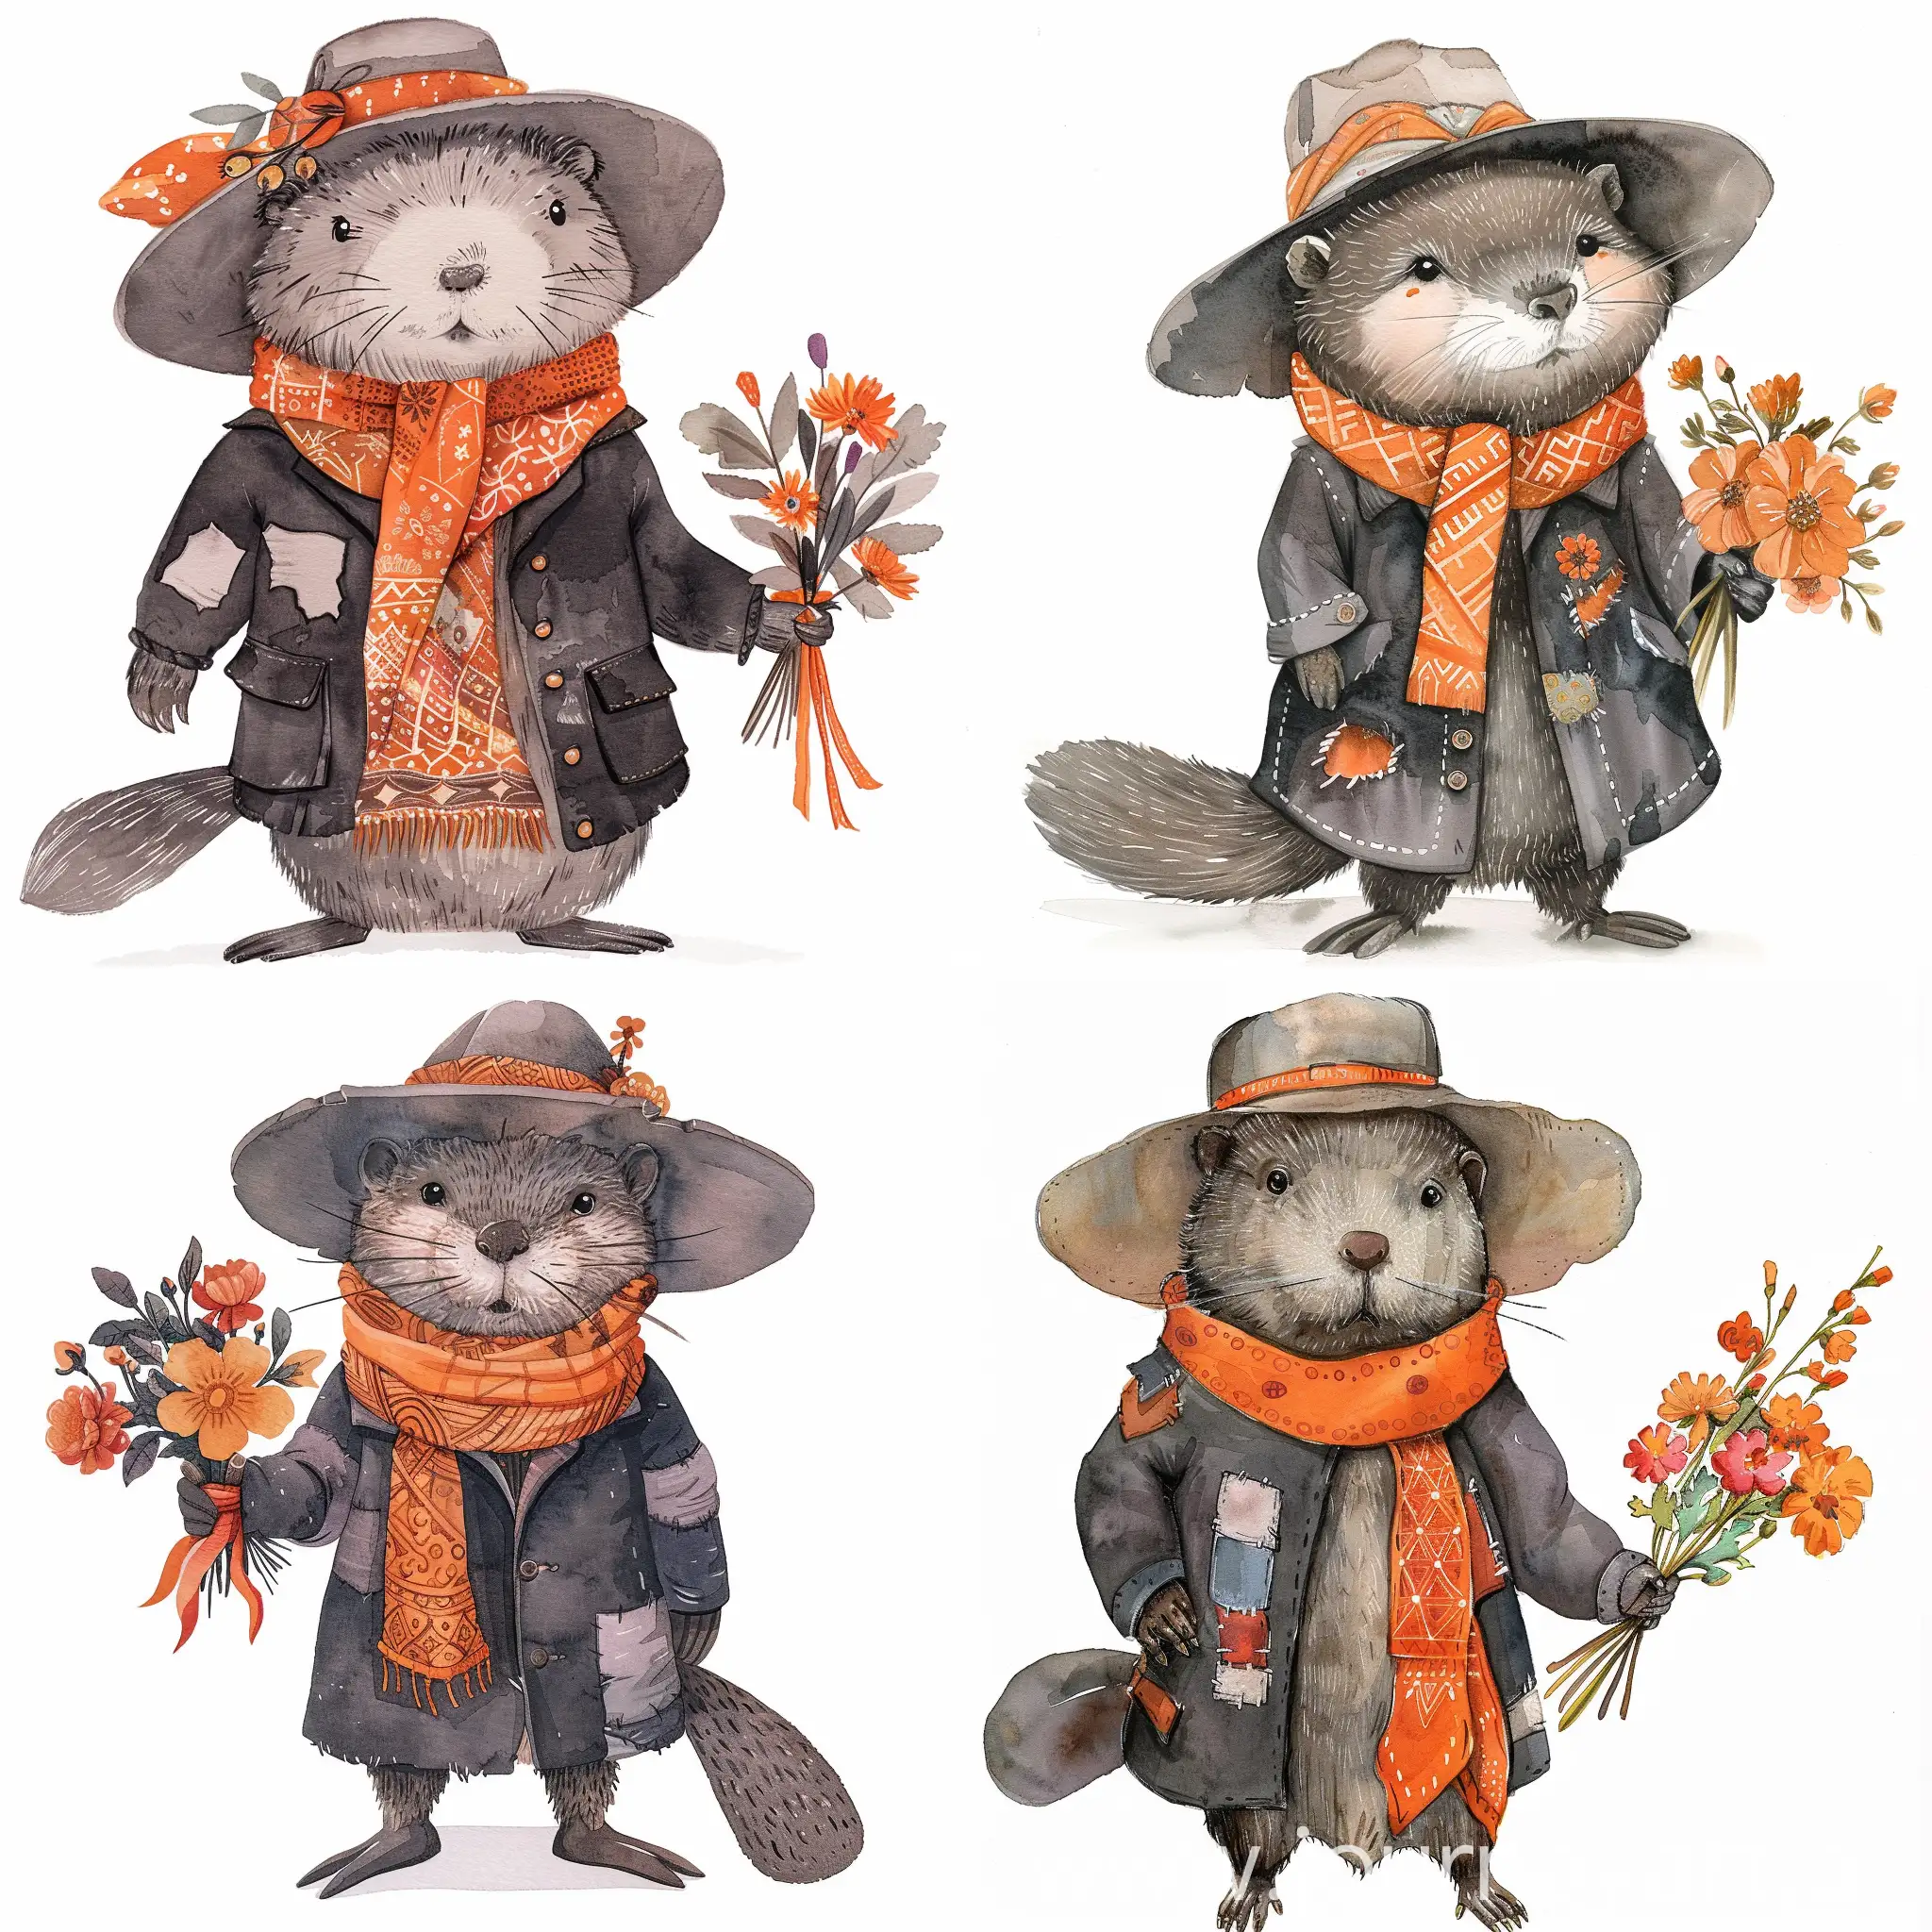 Whimsical-Beaver-in-a-Patched-Coat-with-Bouquet-of-Flowers